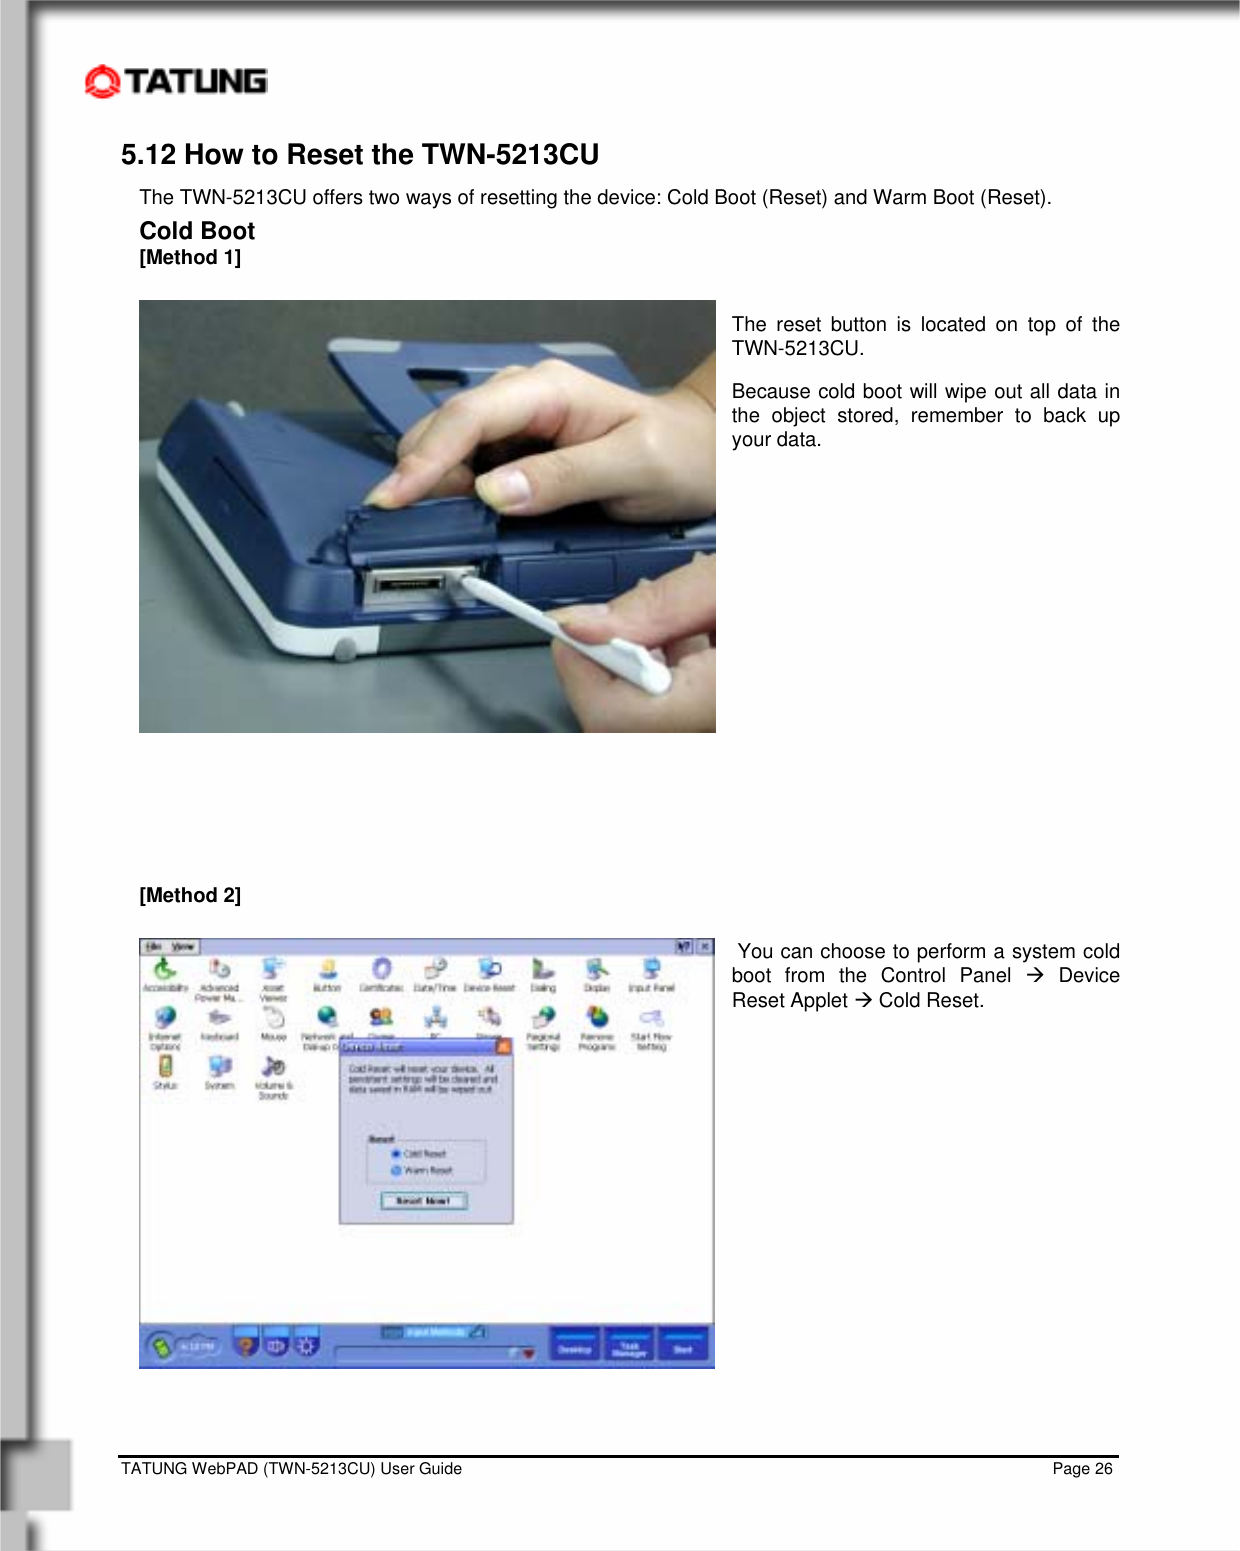    TATUNG WebPAD (TWN-5213CU) User Guide                                                                                                                                   Page 26 5.12 How to Reset the TWN-5213CU The TWN-5213CU offers two ways of resetting the device: Cold Boot (Reset) and Warm Boot (Reset). Cold Boot [Method 1]  The reset button is located on top of the TWN-5213CU.  Because cold boot will wipe out all data in the object stored, remember to back up your data.              [Method 2]   You can choose to perform a system cold boot from the Control Panel Æ Device Reset Applet Æ Cold Reset.              